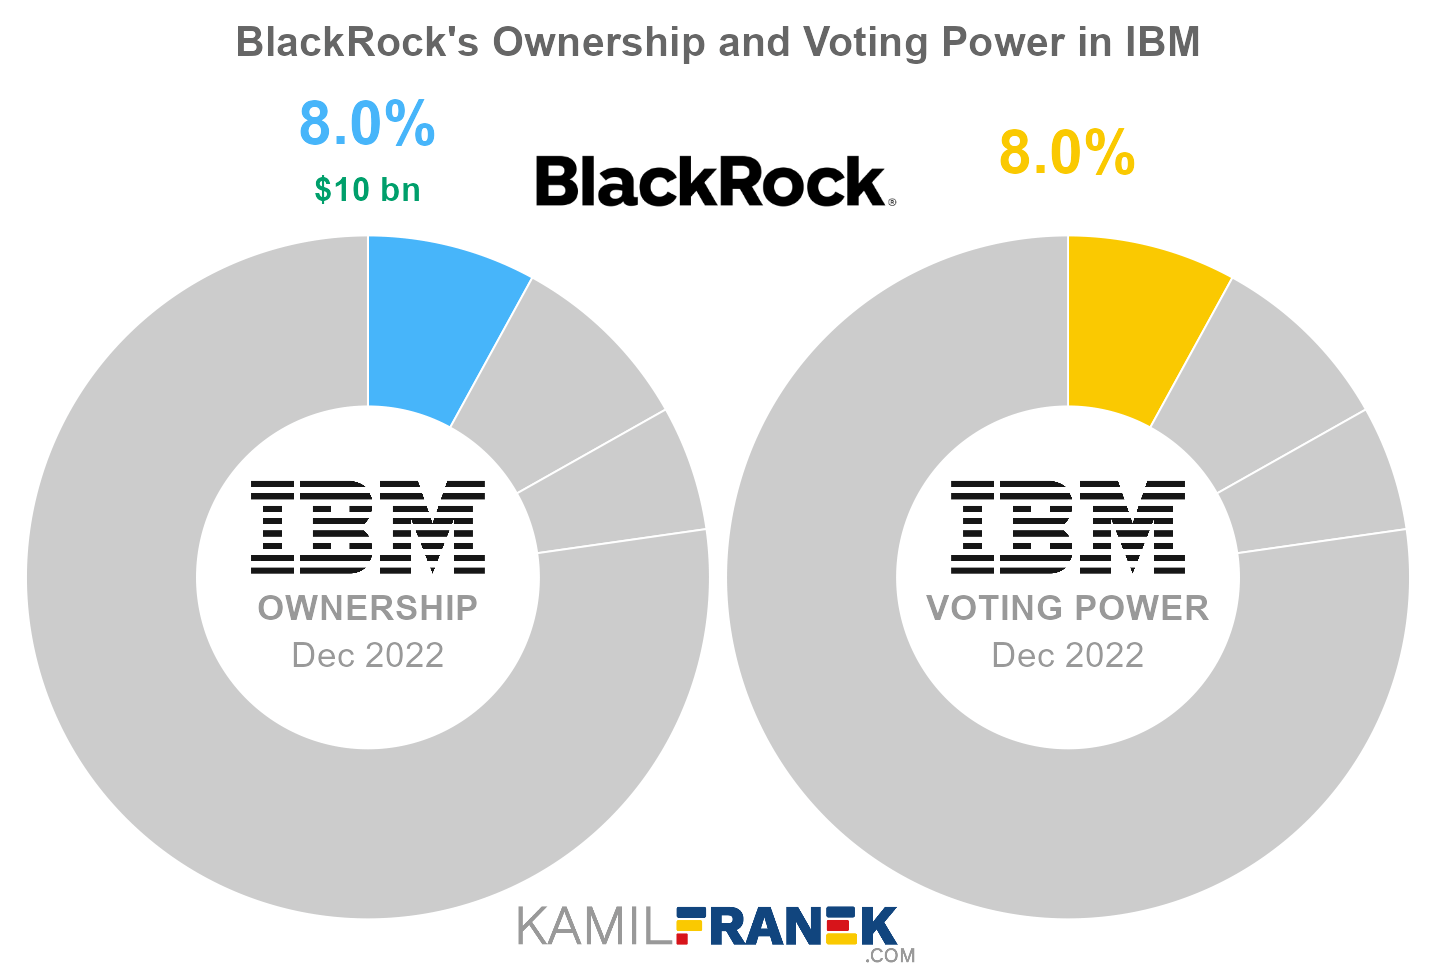 BlackRock's share ownership and voting power in IBM (chart)